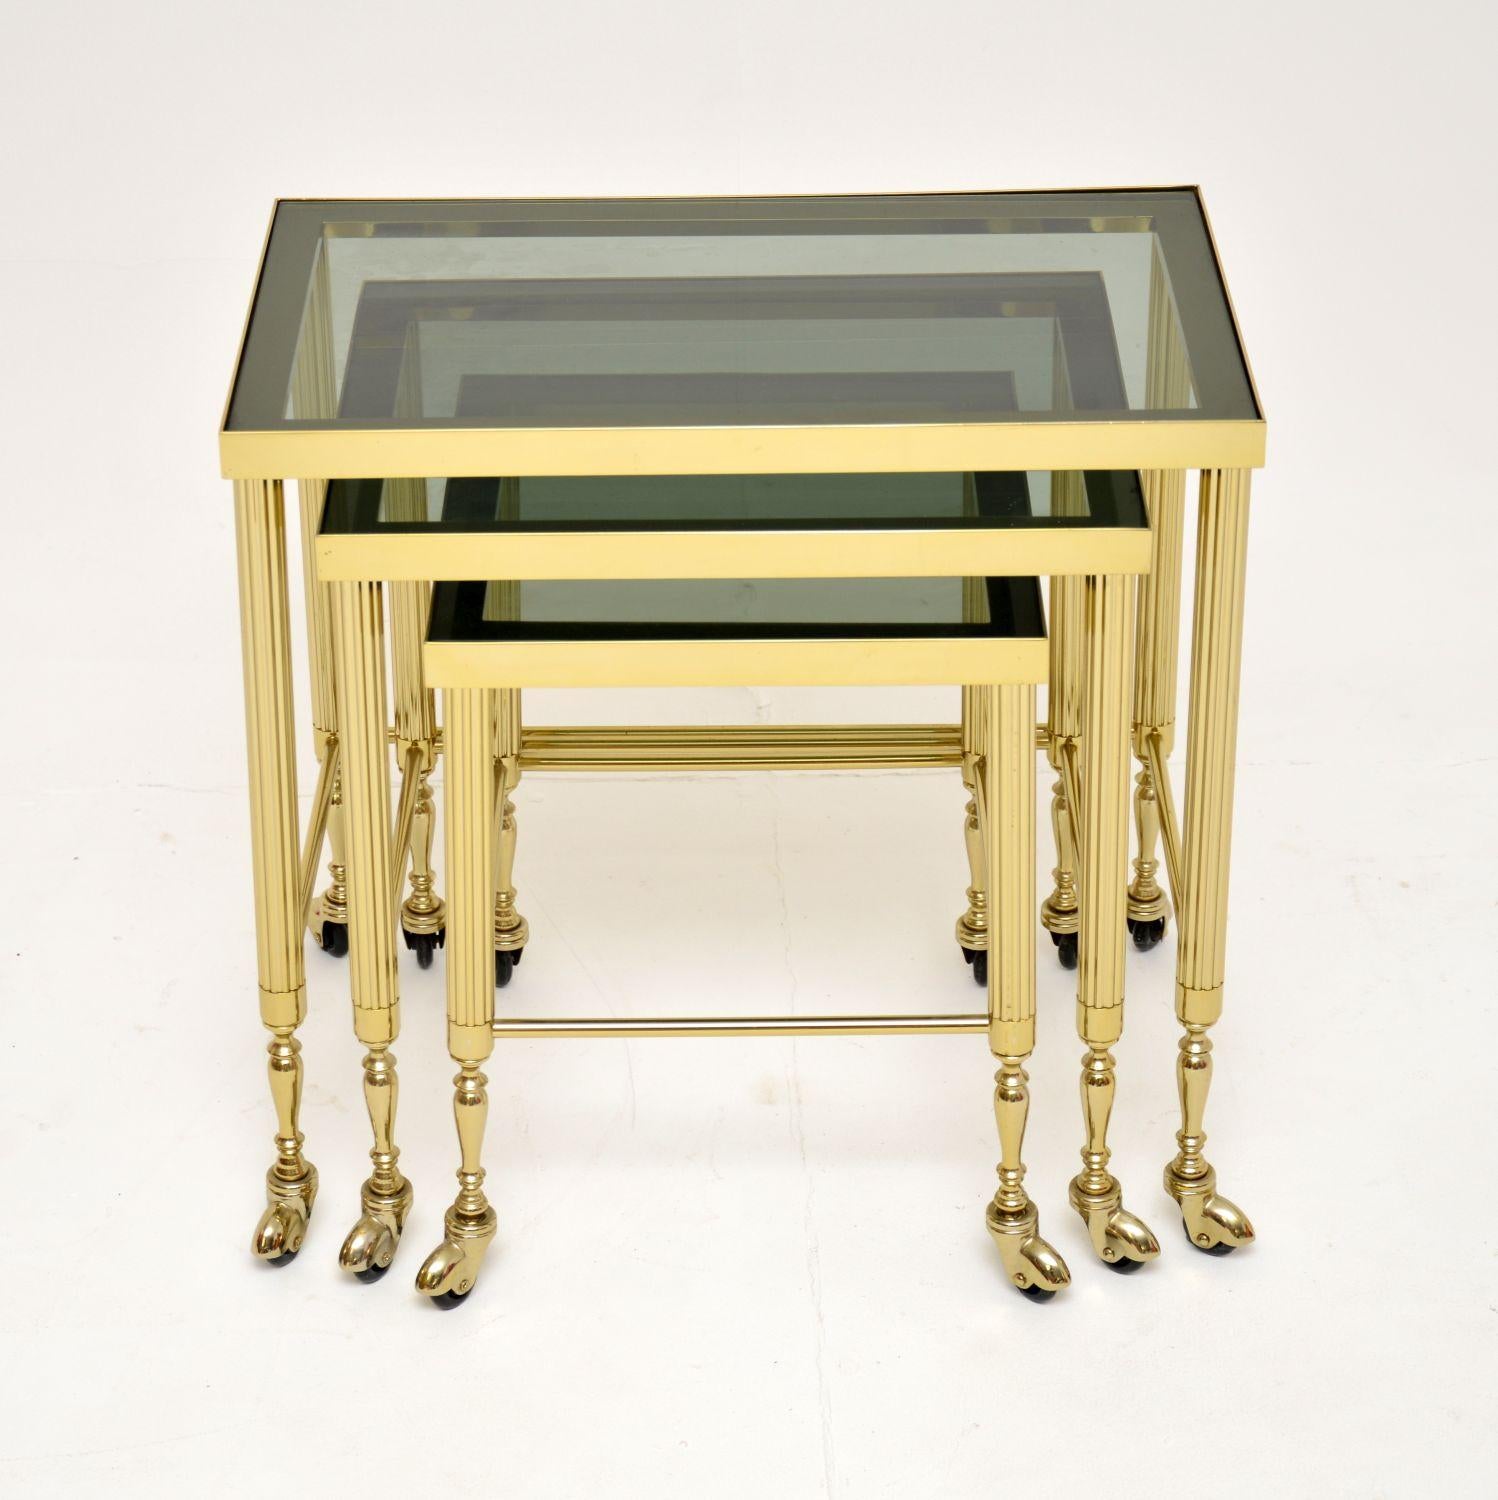 A stunning set of three vintage nesting tables in solid brass. They were made in France, and date from around the 1960’s.

They are a very useful size, the quality is great and they are in excellent condition for their age.

Each table rolls